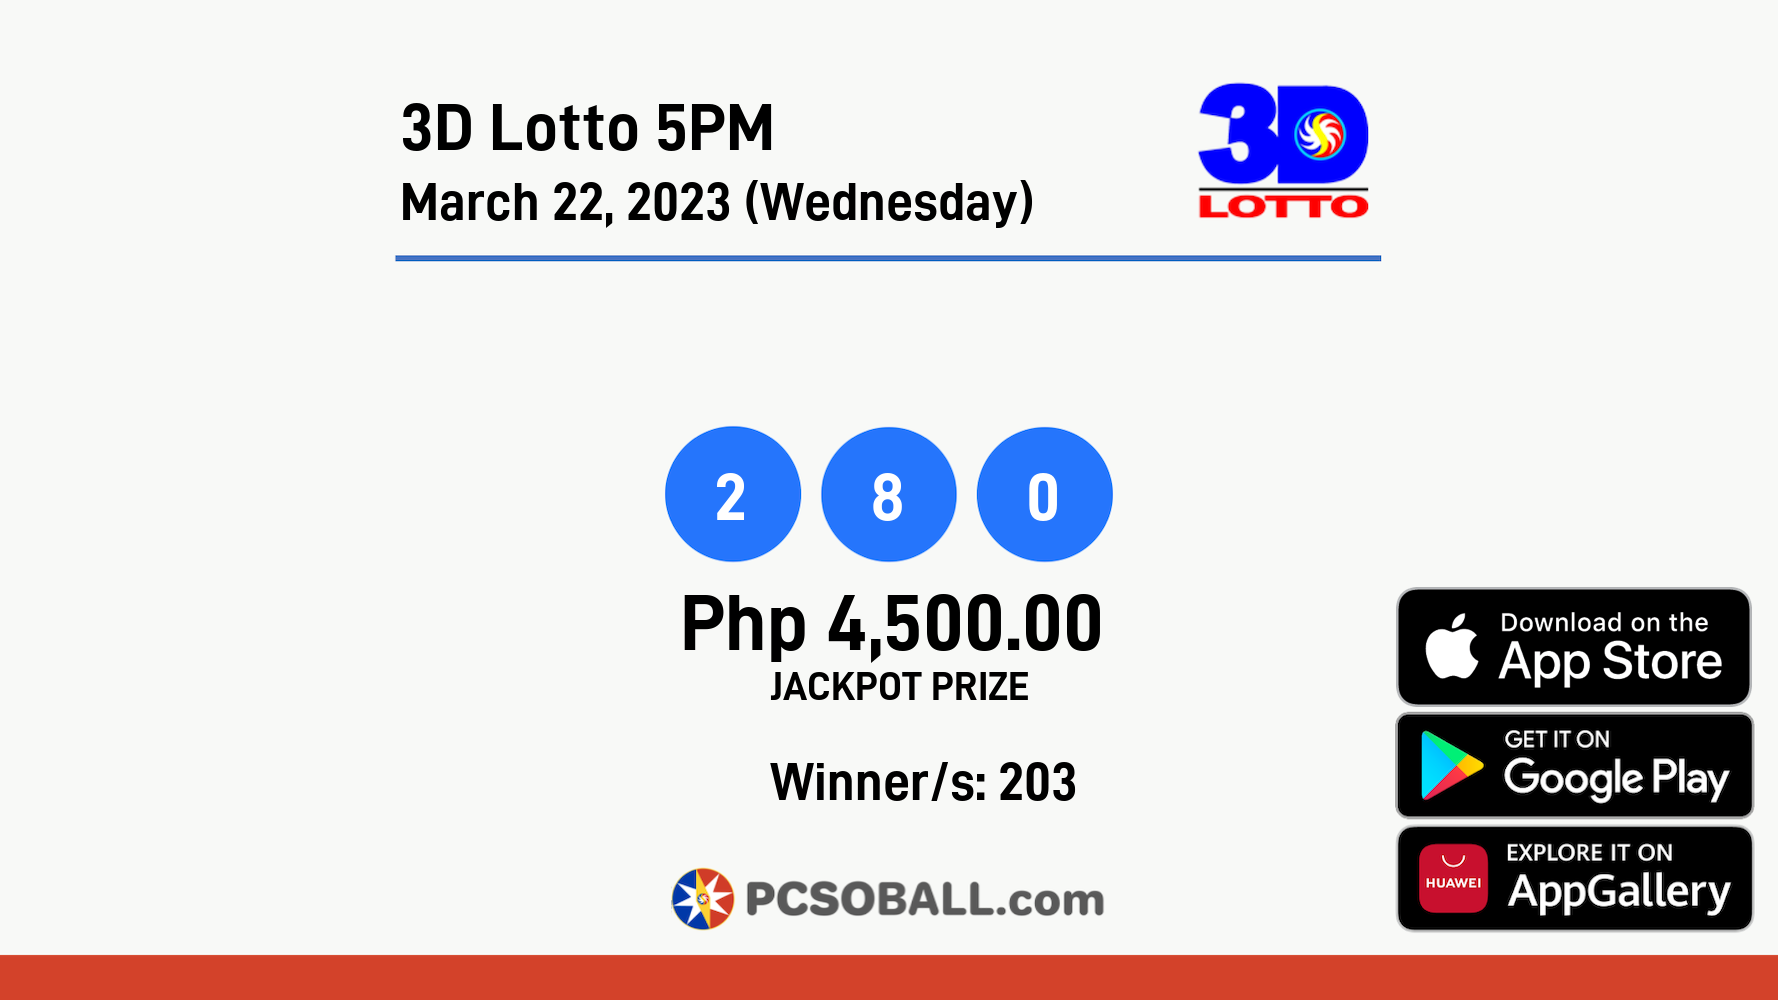 3D Lotto 5PM March 22, 2023 (Wednesday) Result